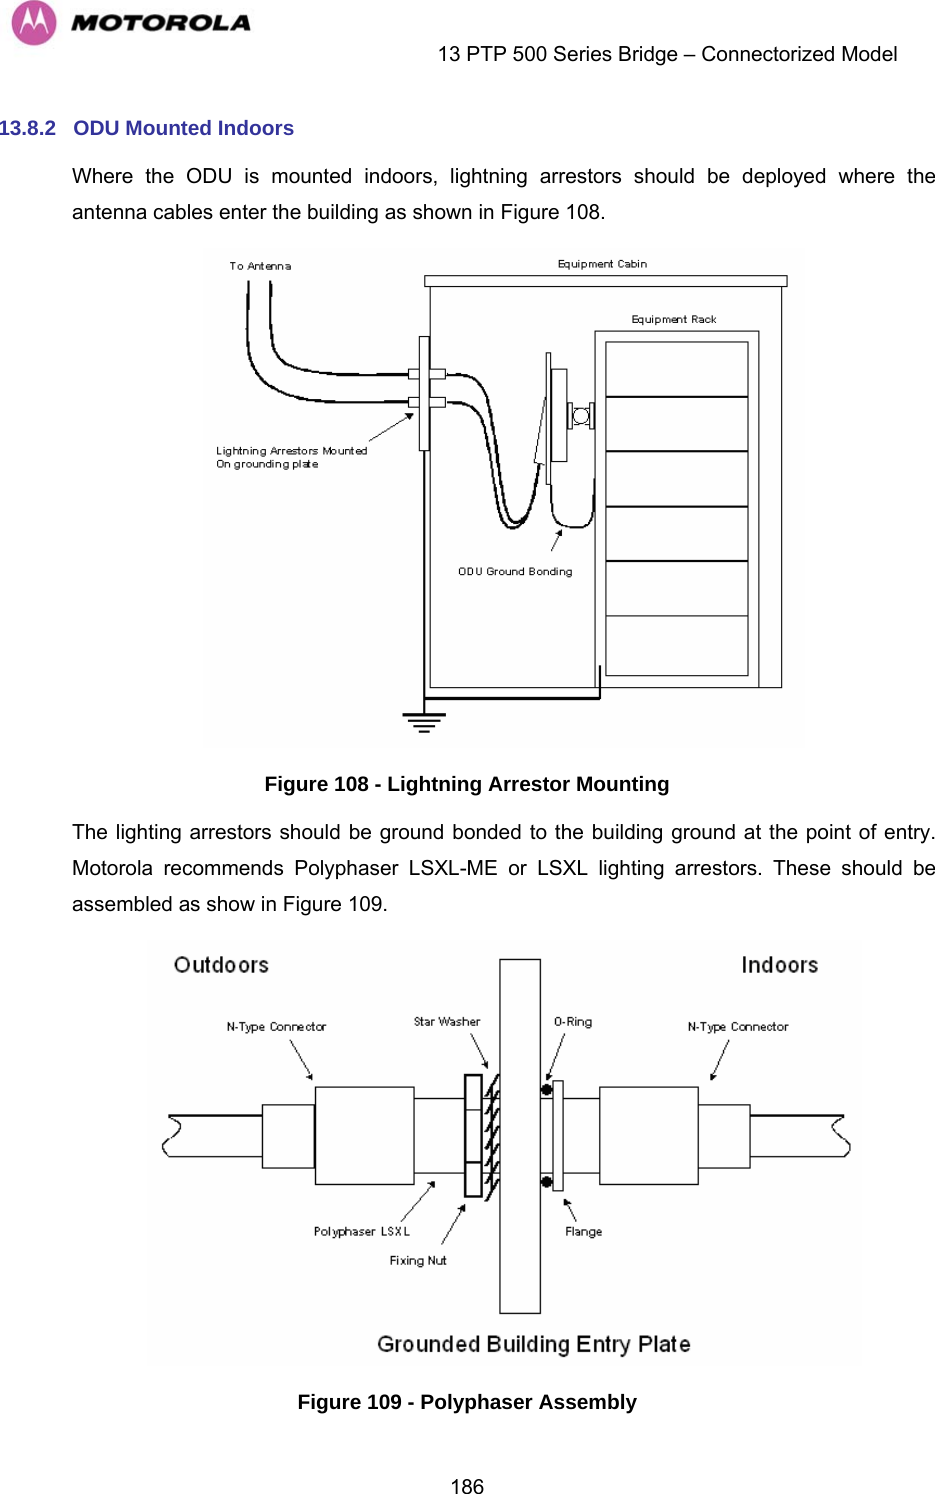    13 PTP 500 Series Bridge – Connectorized Model  18613.8.2  ODU Mounted Indoors Where the ODU is mounted indoors, lightning arrestors should be deployed where the antenna cables enter the building as shown in Figure 108.  Figure 108 - Lightning Arrestor Mounting The lighting arrestors should be ground bonded to the building ground at the point of entry. Motorola recommends Polyphaser LSXL-ME or LSXL lighting arrestors. These should be assembled as show in Figure 109.  Figure 109 - Polyphaser Assembly 